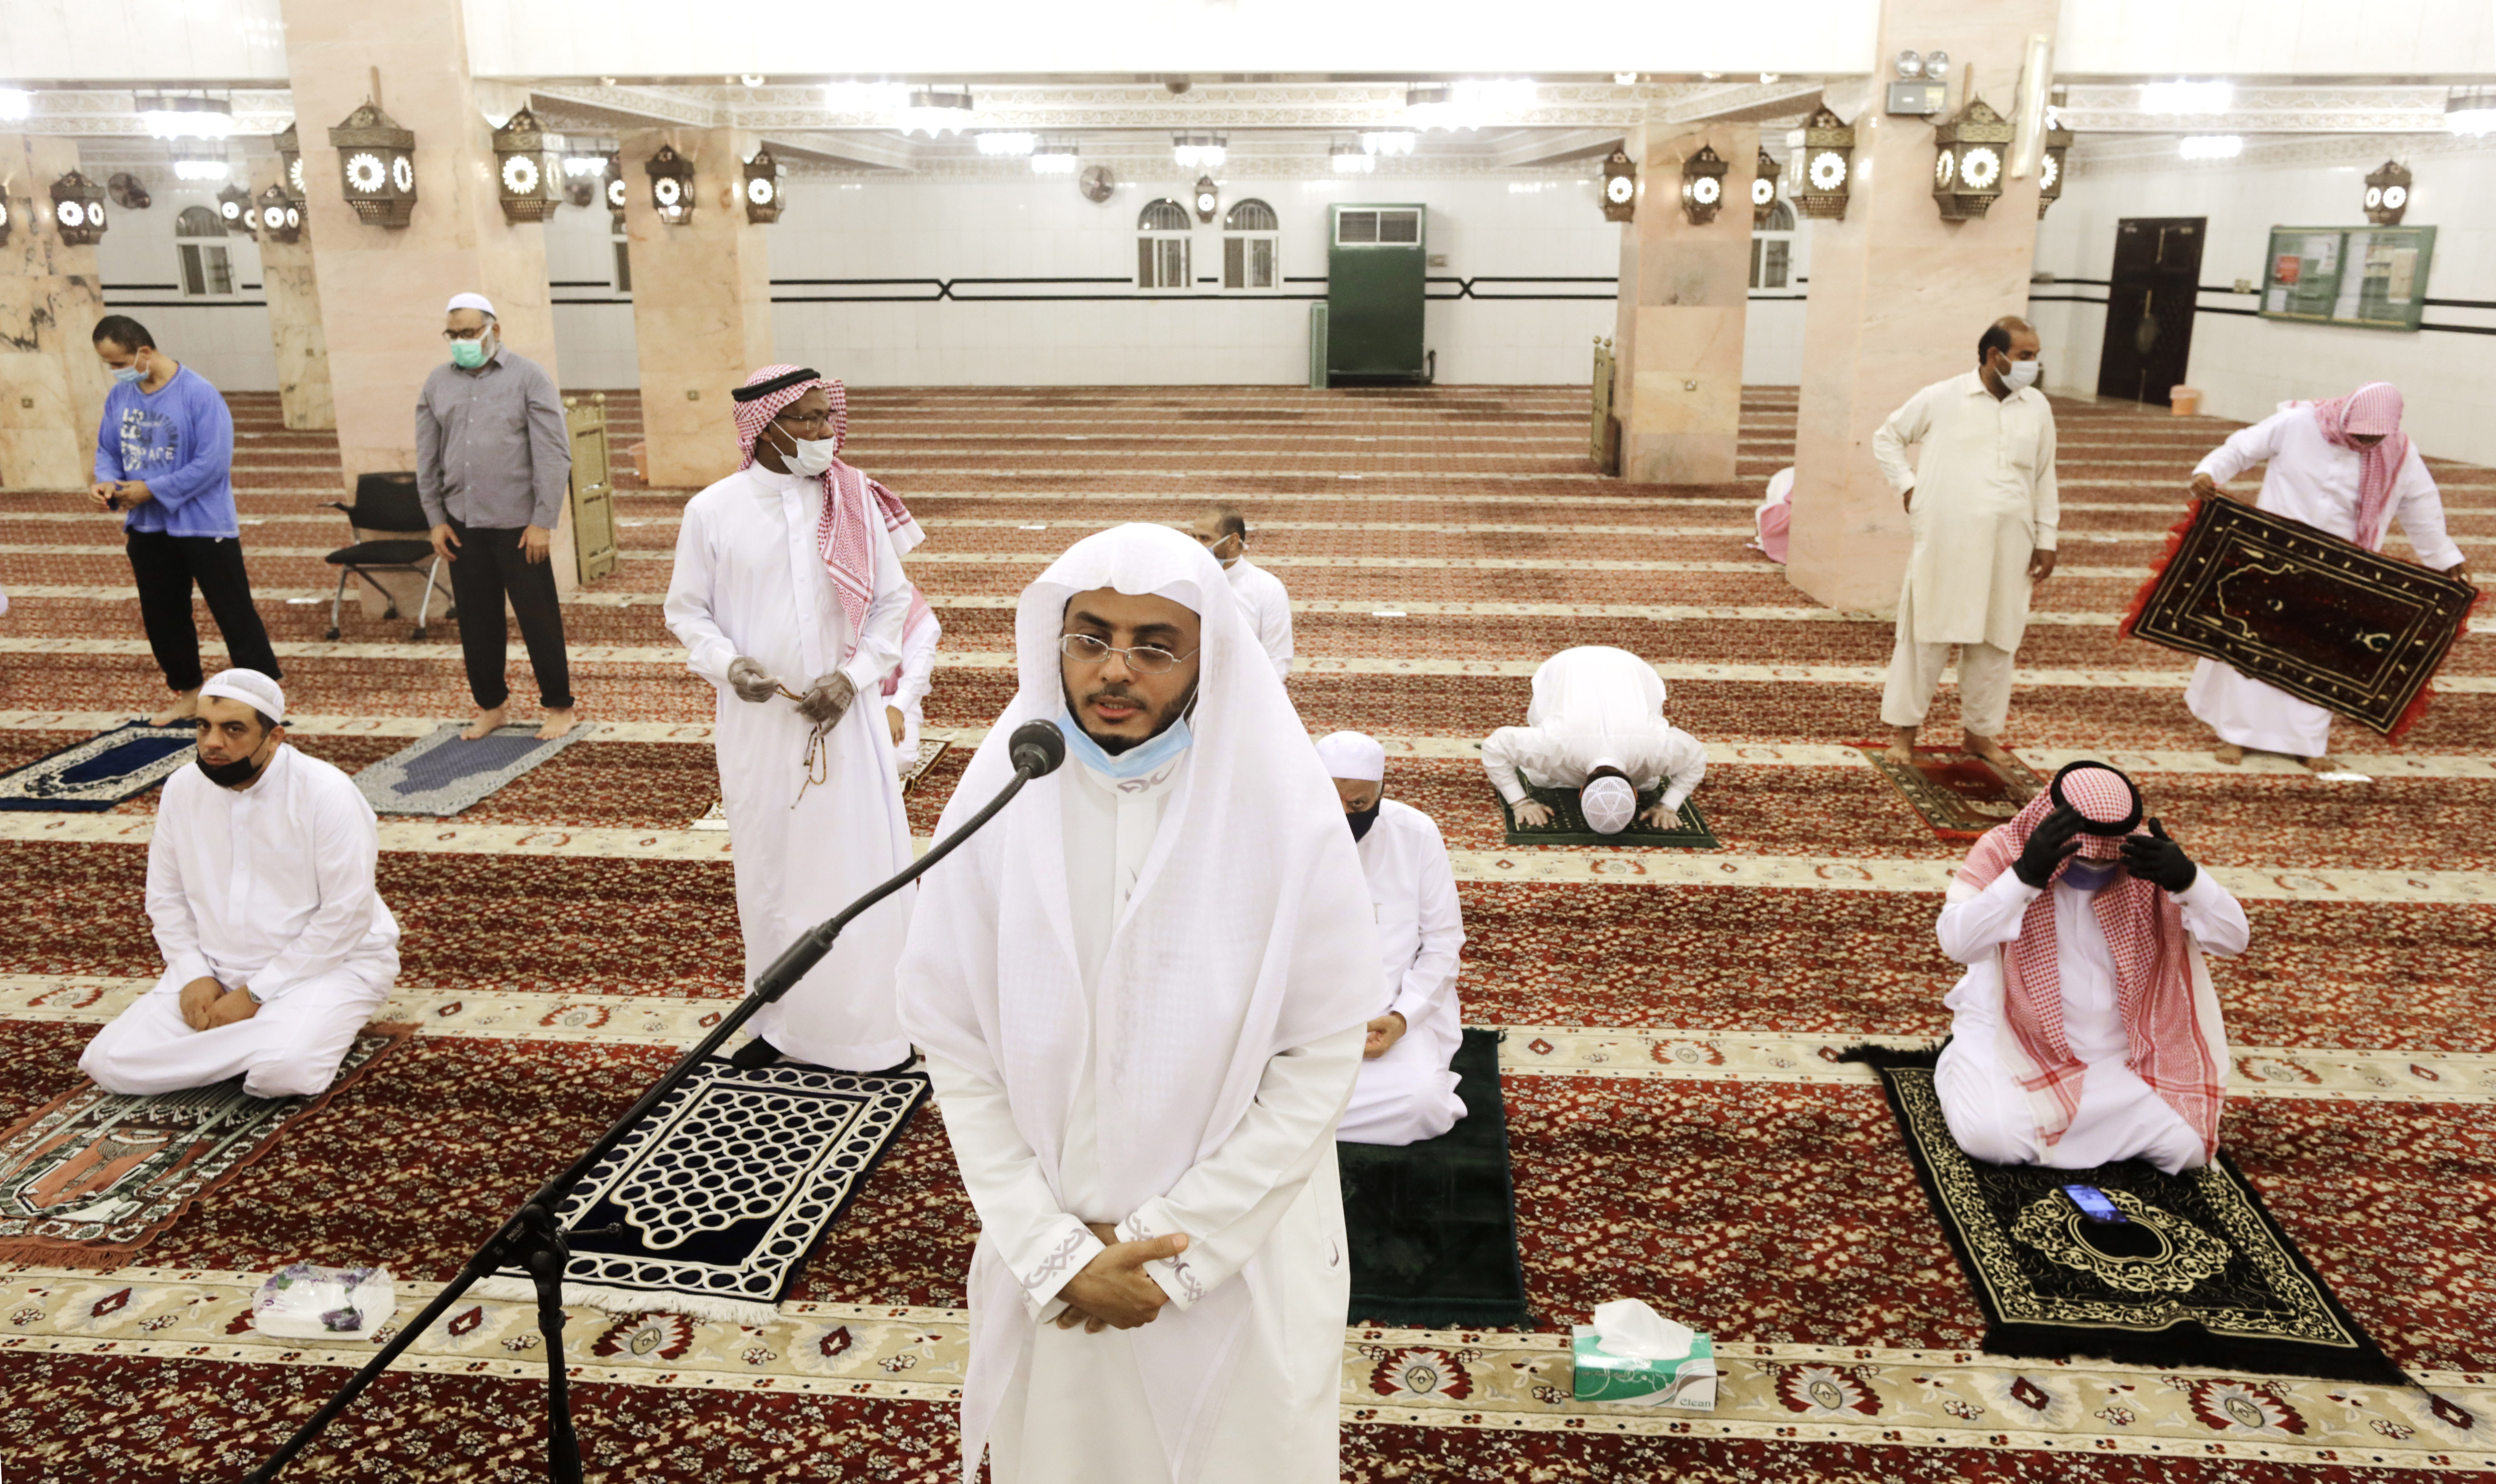 Saudi cleric Hammoud Al-Labban recites the call to prayers as worshippers wearing face masks and observing social distancing guidelines to protect against the new coronavirus, attend dawn prayers at al-Mirabi Mosque in Jiddah, Saudi Arabia, Sunday, May 31, 2020. The Ministry of Islamic Affairs said mosques will open to the public for prayers from May 31 until June 20, except in Mecca, with precautionary measures and instructions. (AP Photo/Amr Nabil)